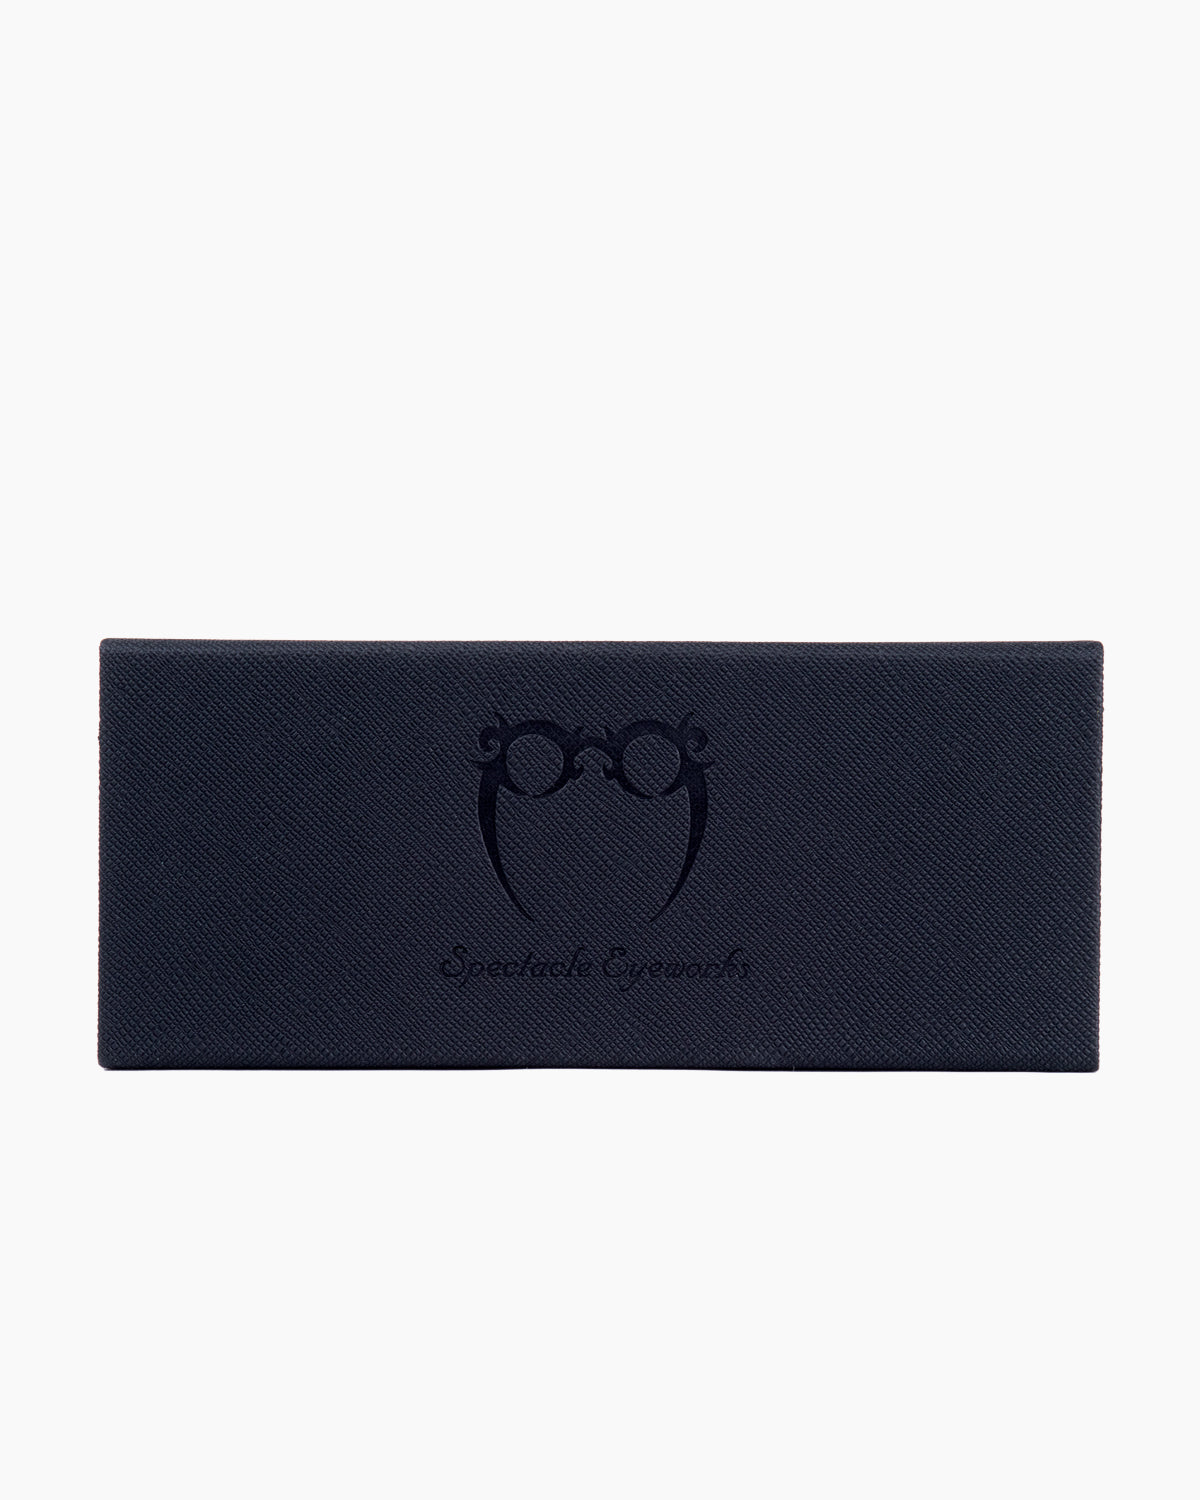 Spectacleeyeworks - Riley - c736 | Bar à lunettes:  Marie-Sophie Dion